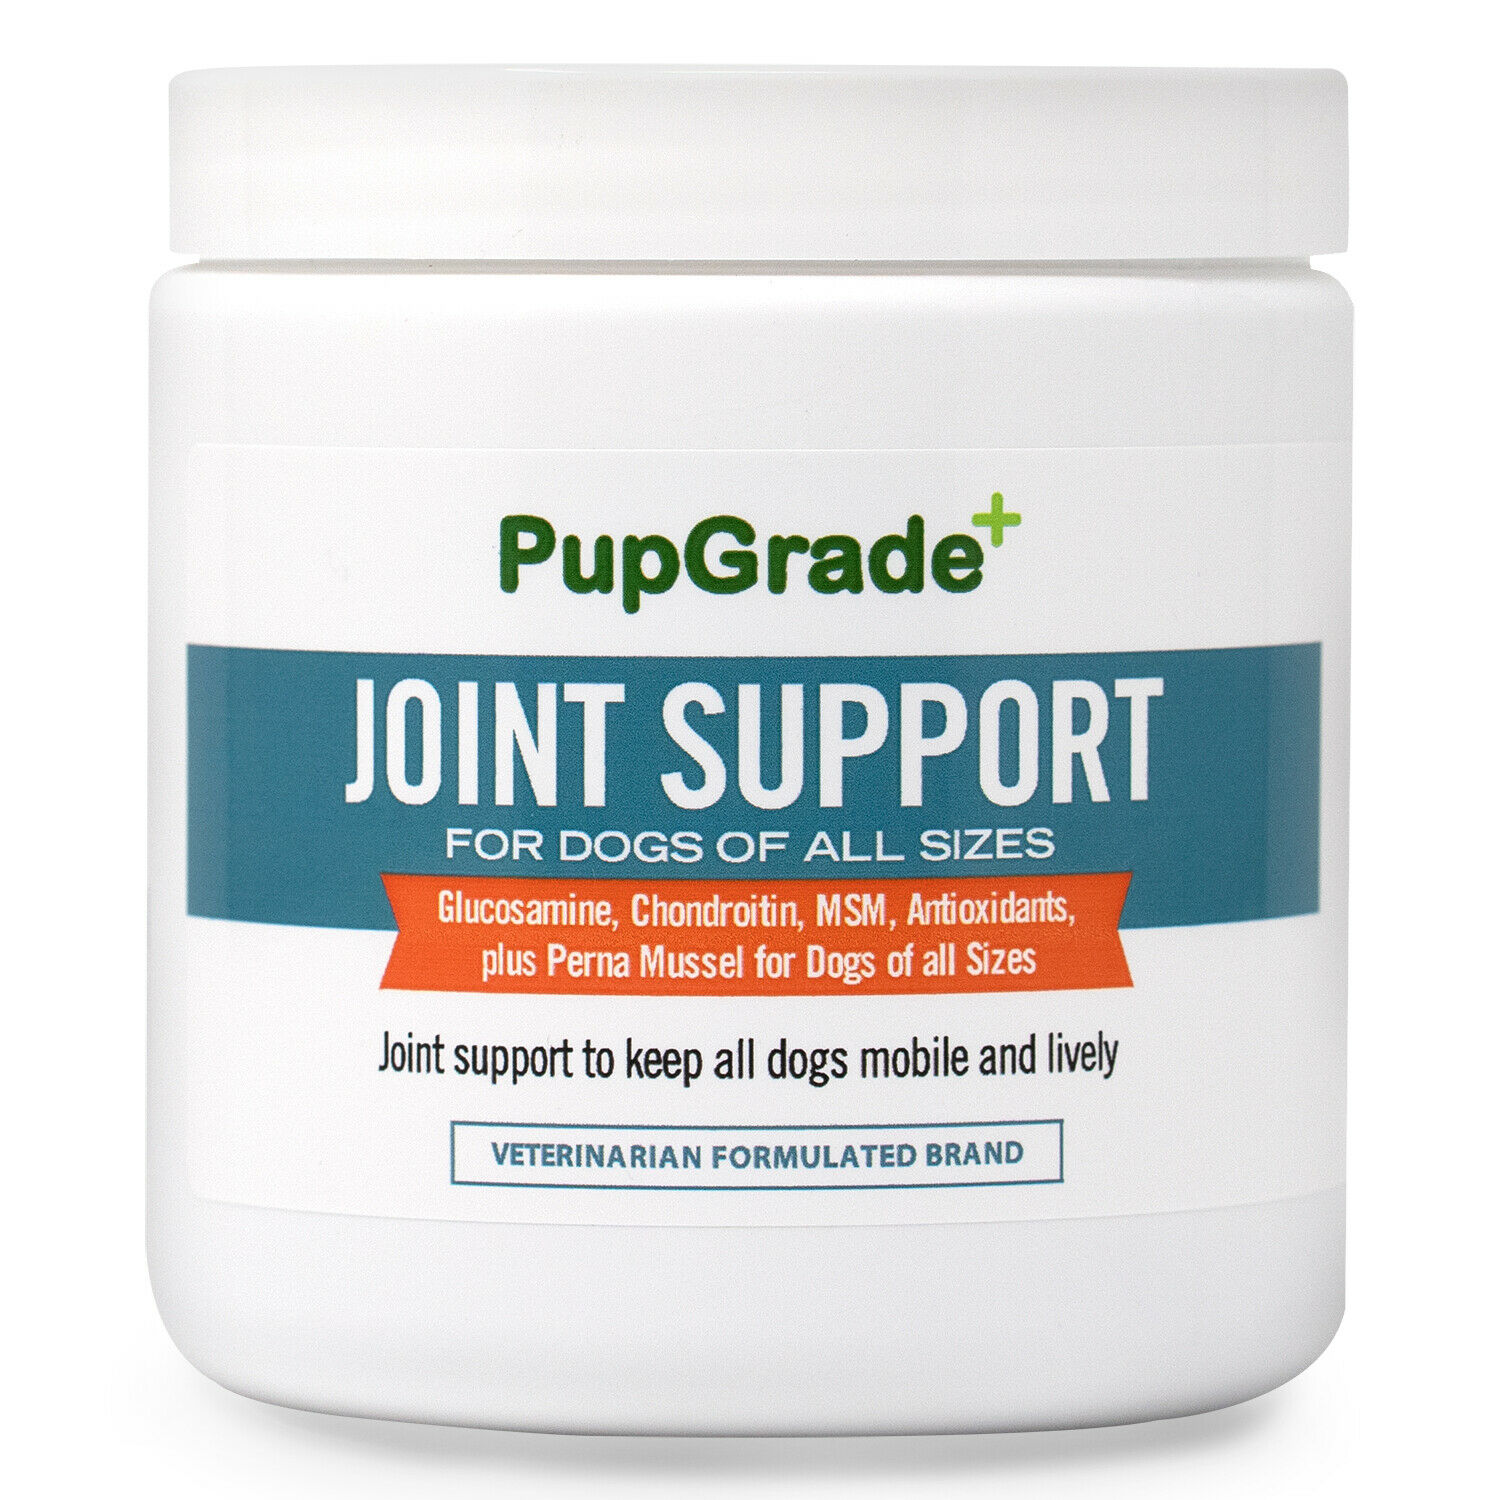 Glucosamine Chondroitin Msm For Dogs Hip And Joint Support Supplement Soft Chews